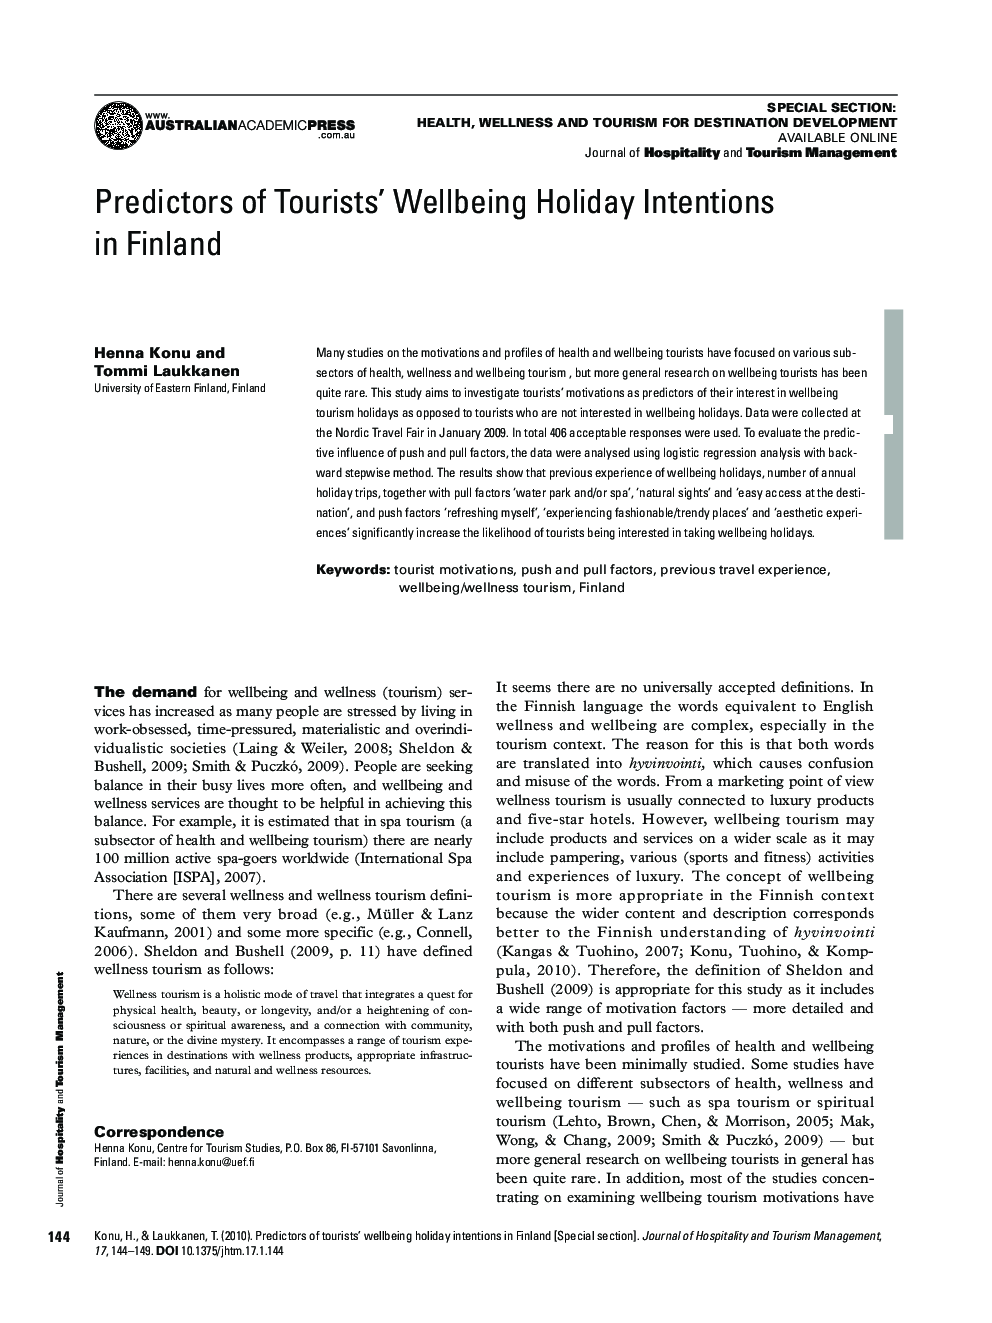 Predictors of Tourists' Wellbeing Holiday Intentions in Finland